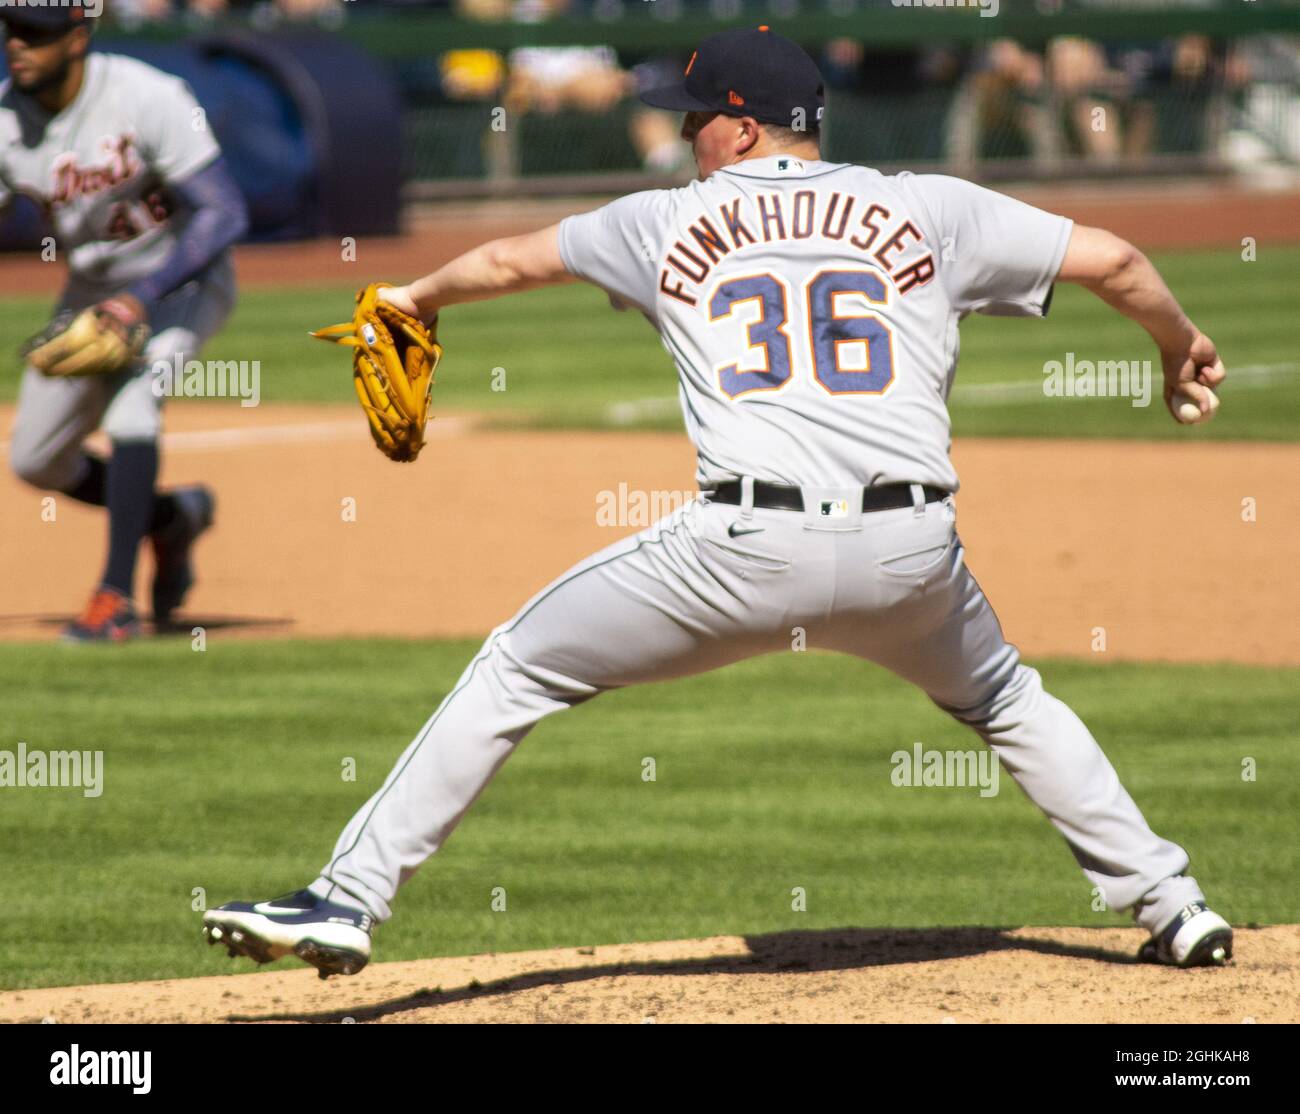 Pnc park hi-res stock photography and images - Alamy